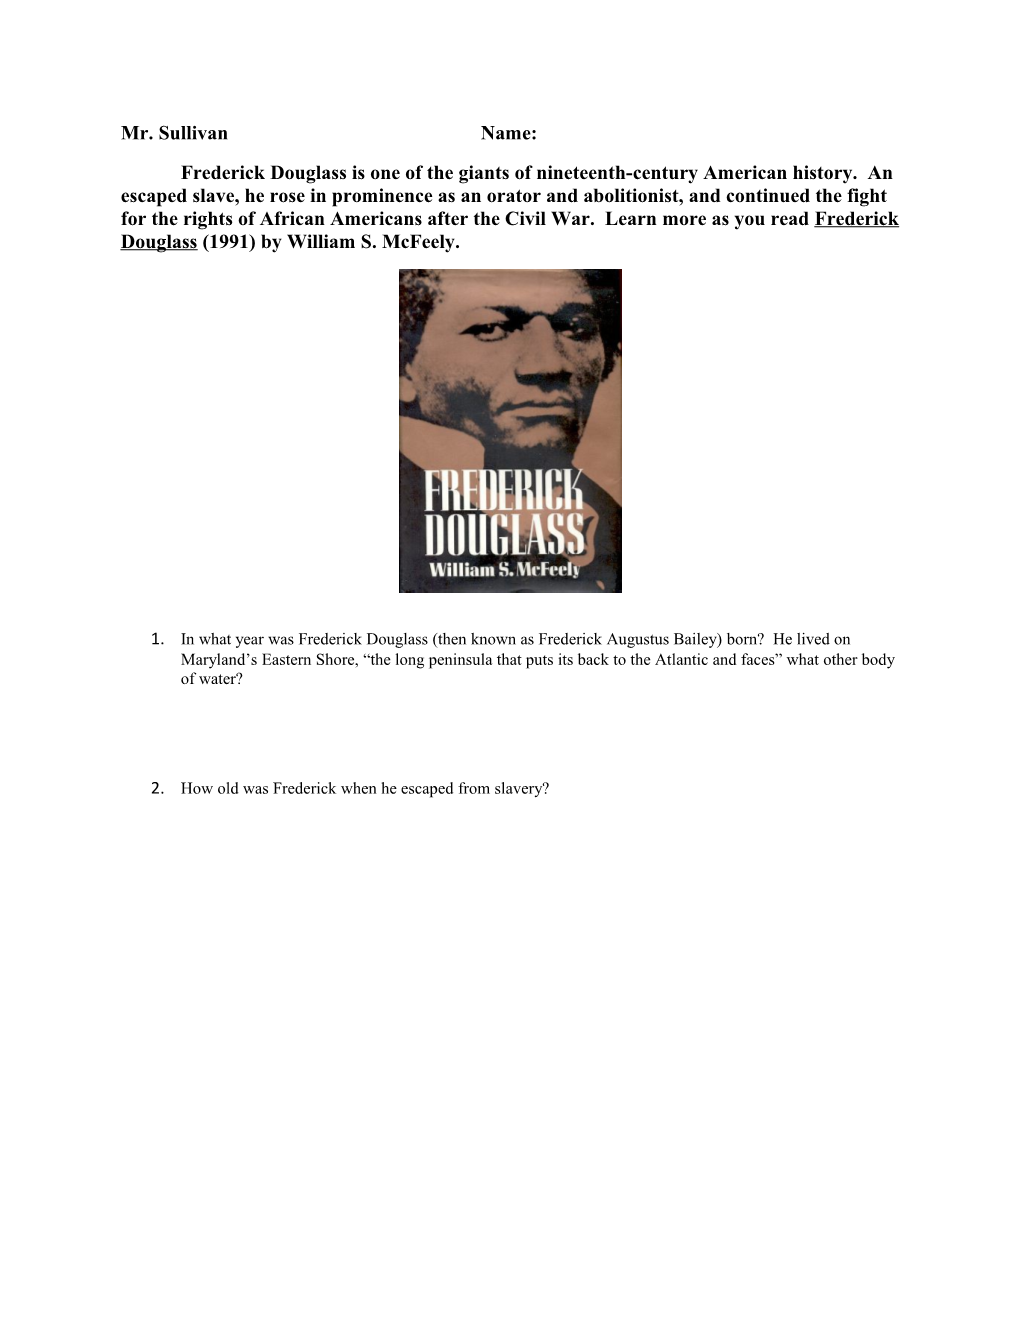 Frederick Douglass Is One of the Giants of Nineteenth-Century American History. an Escaped